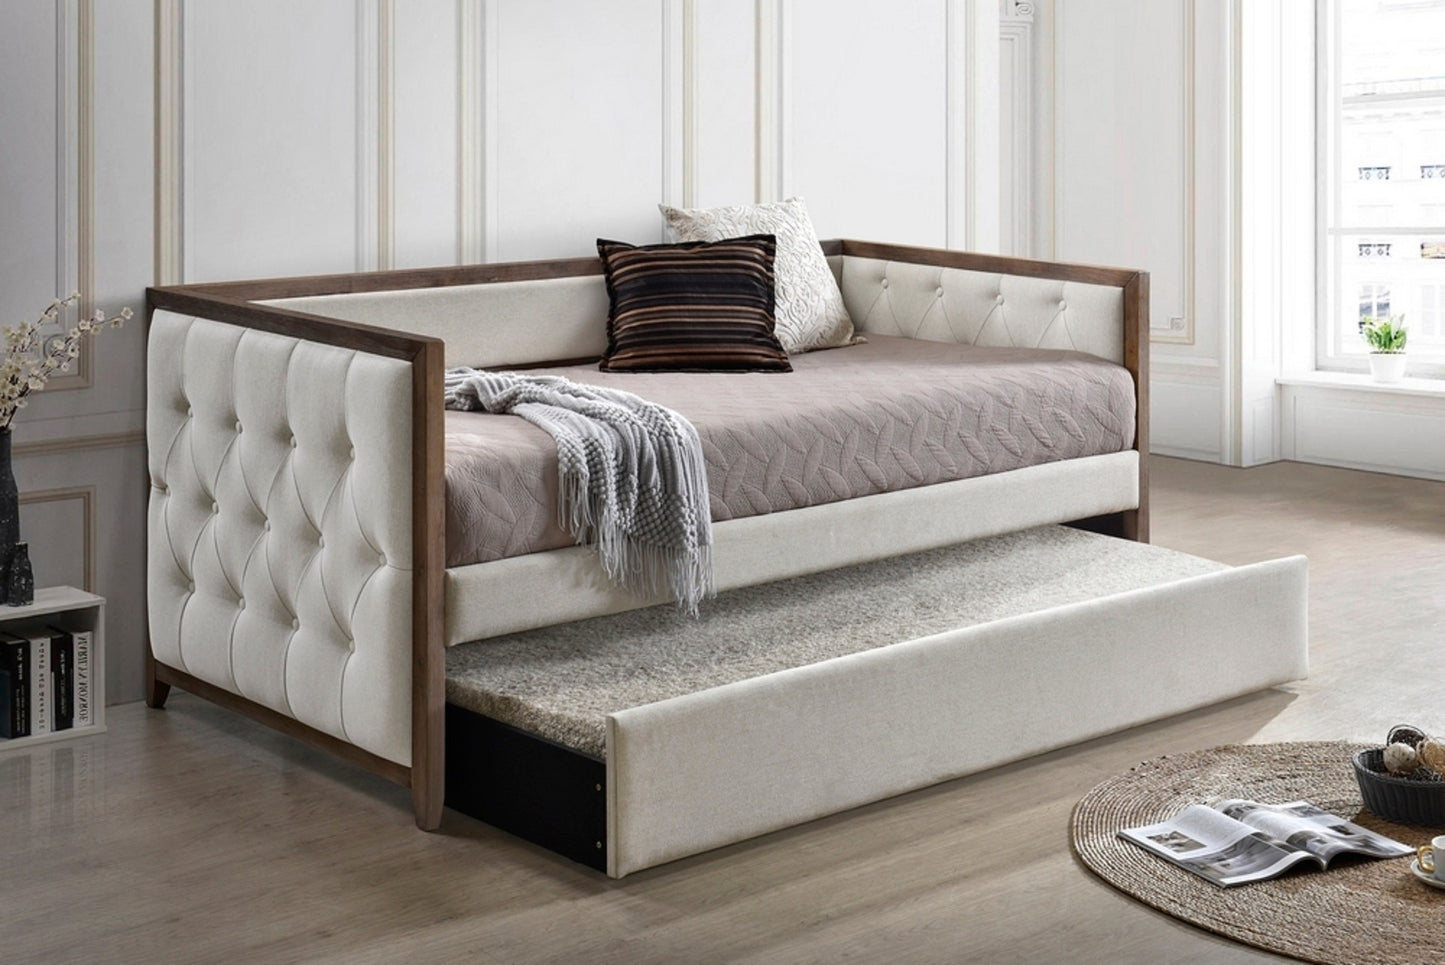 Ultra Daybed with Trundle (twin)